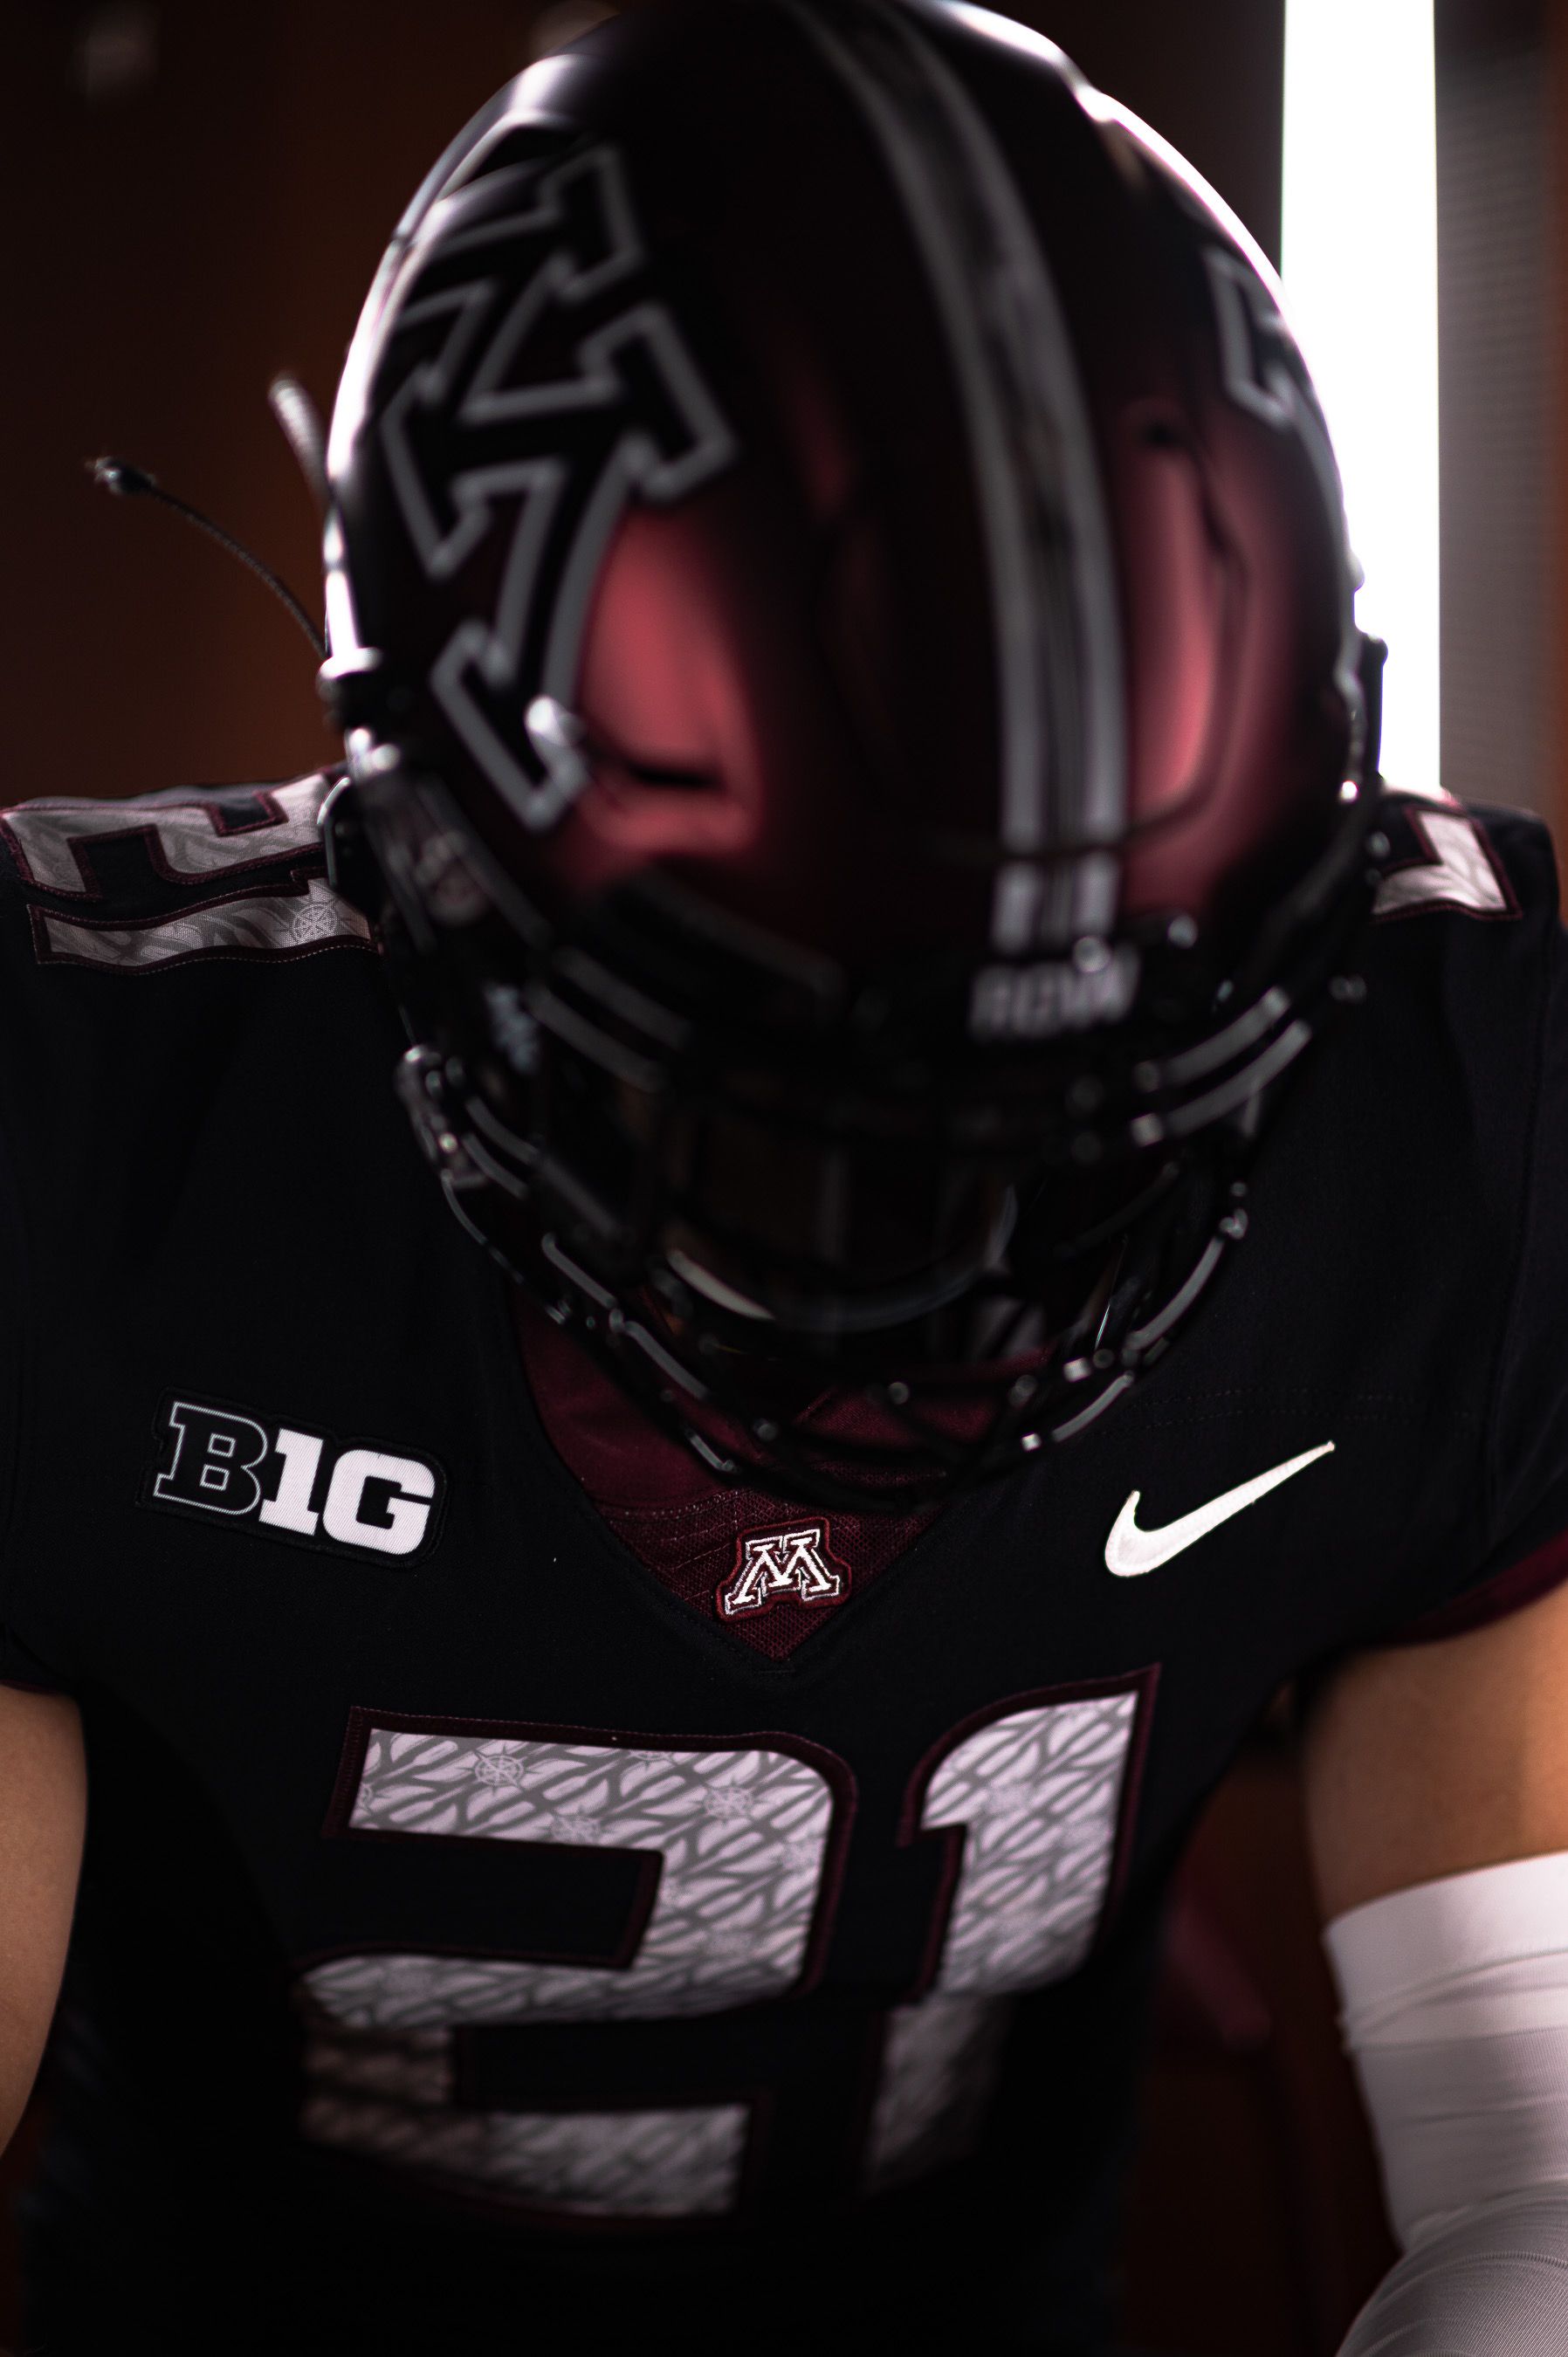 New Adidas college football jerseys mostly ditching that weird pattern 